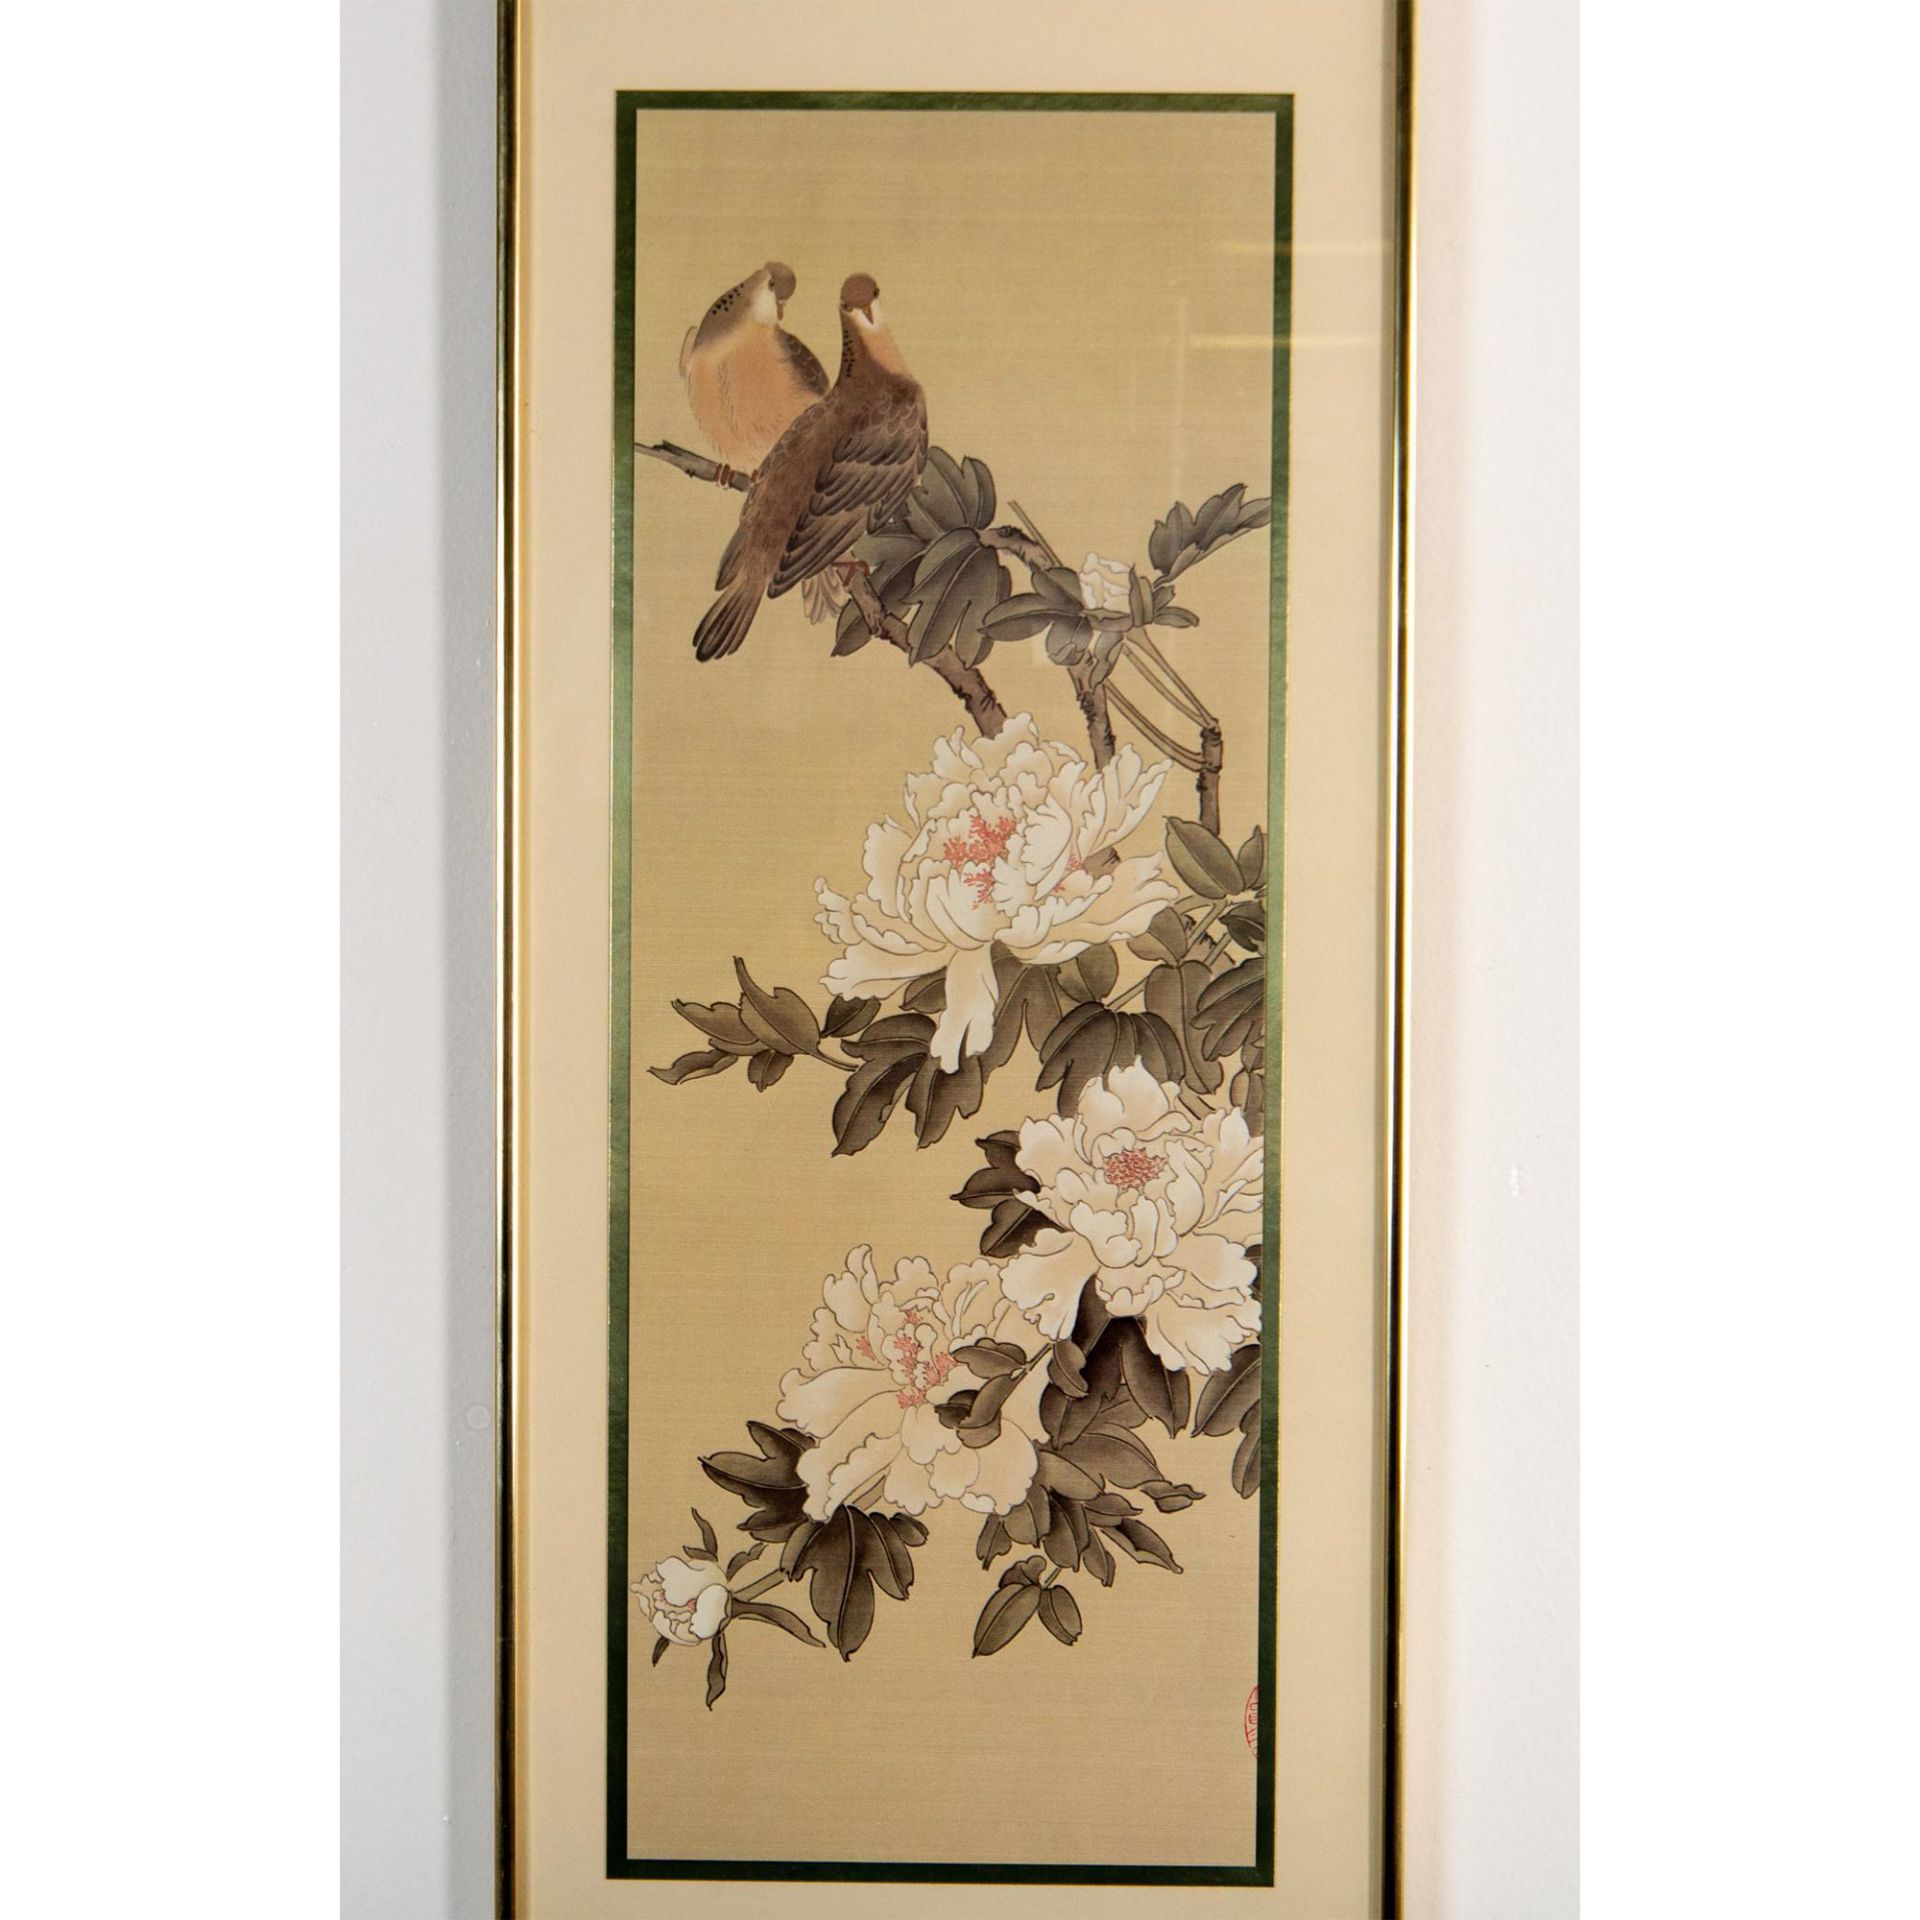 Giclee of Antique Chinese Print - Image 3 of 5